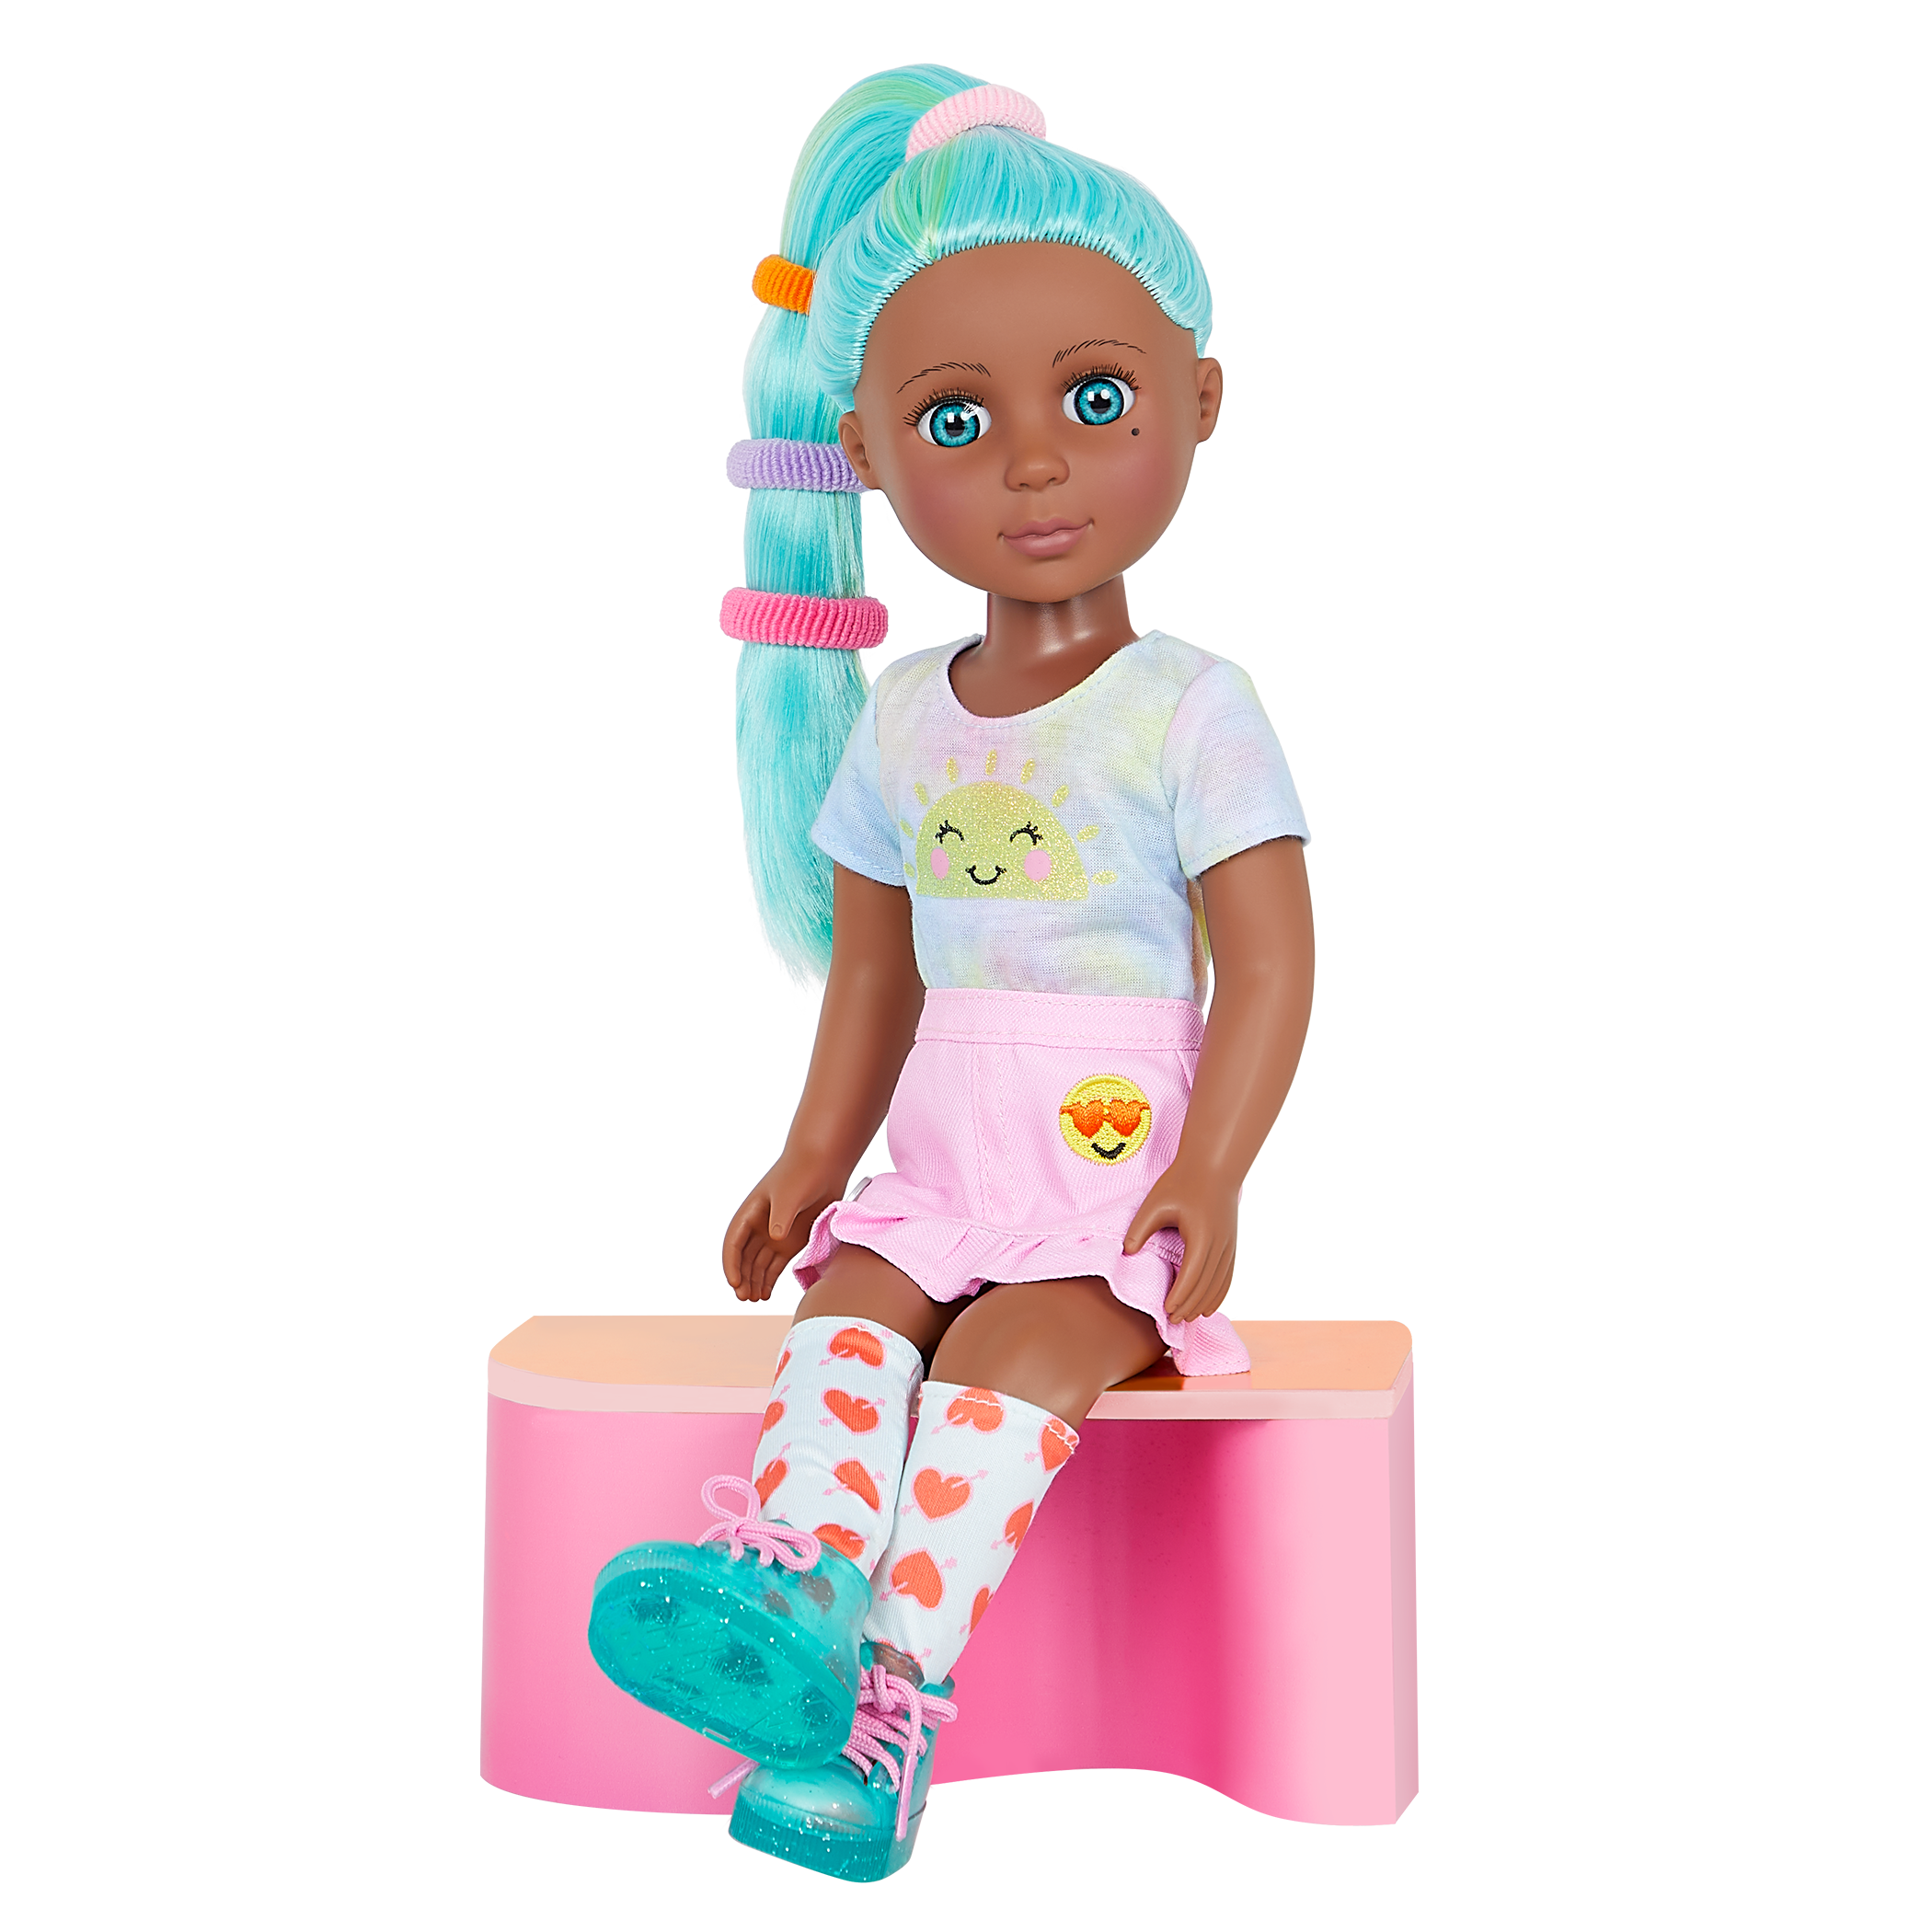 Glitter Girls Duckie Turquoise Hair & Styling Accessories 14 Poseable  Fashion Doll